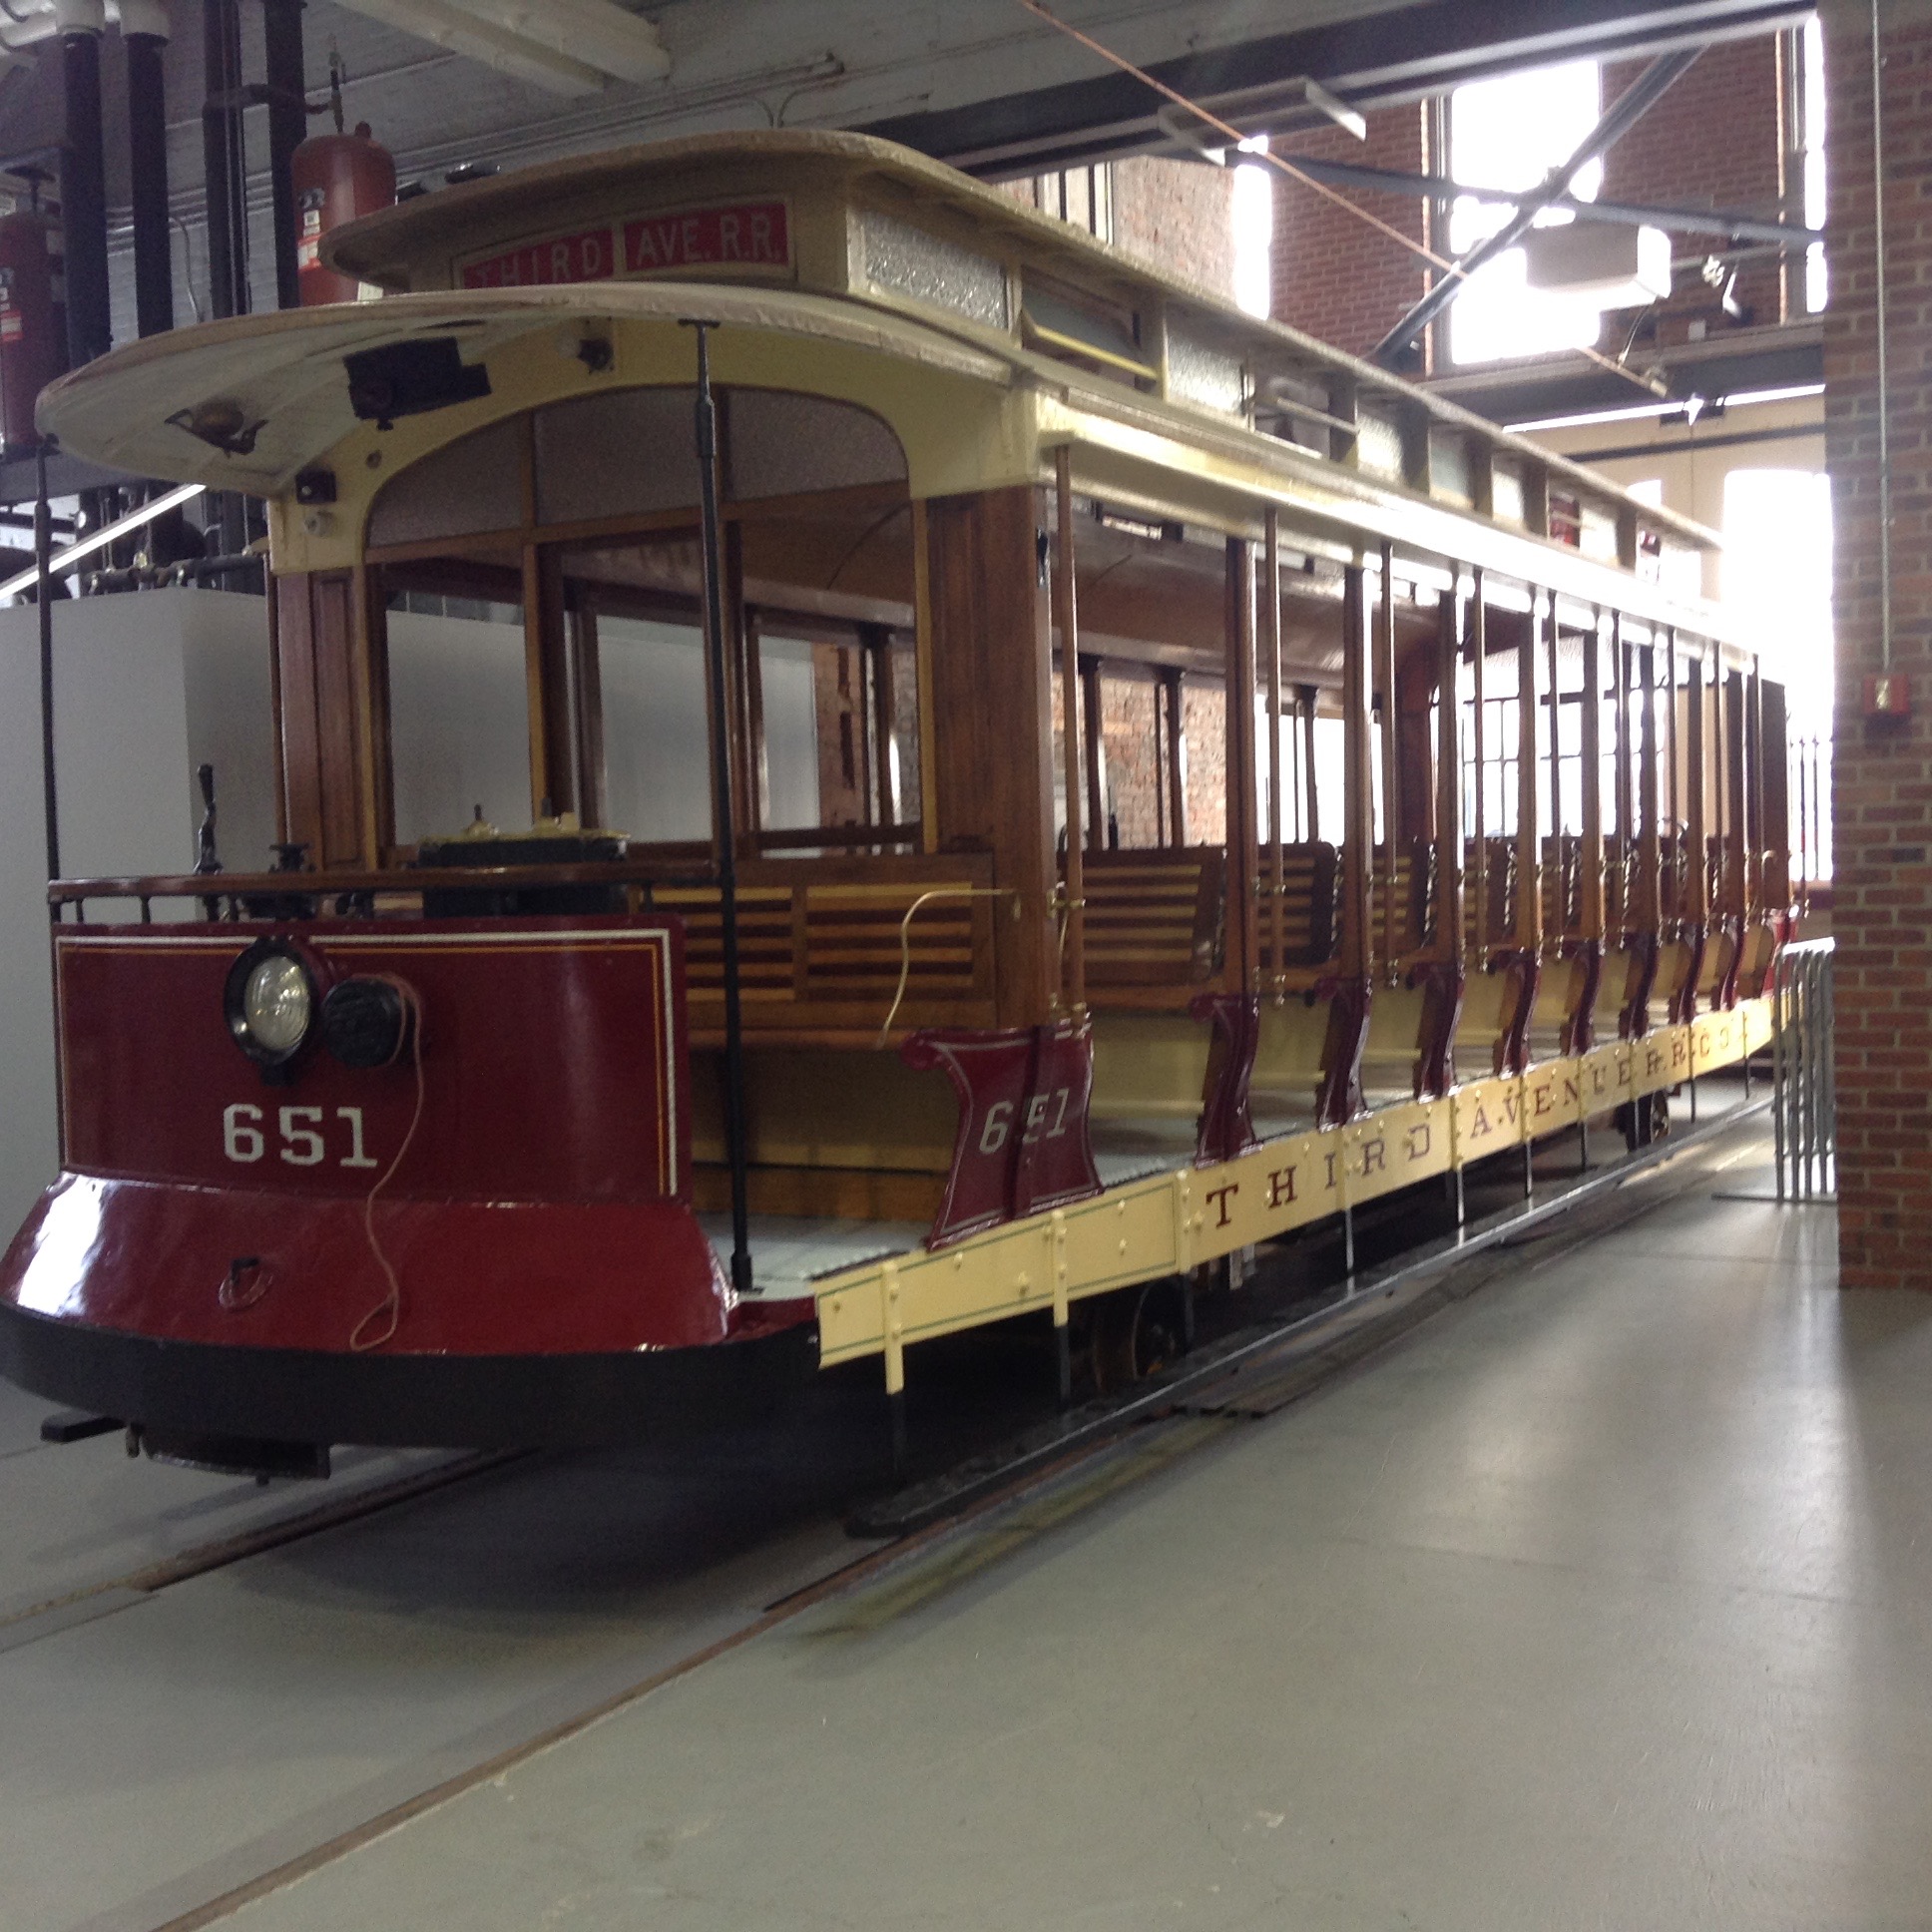 Open Car #651 at the Museum